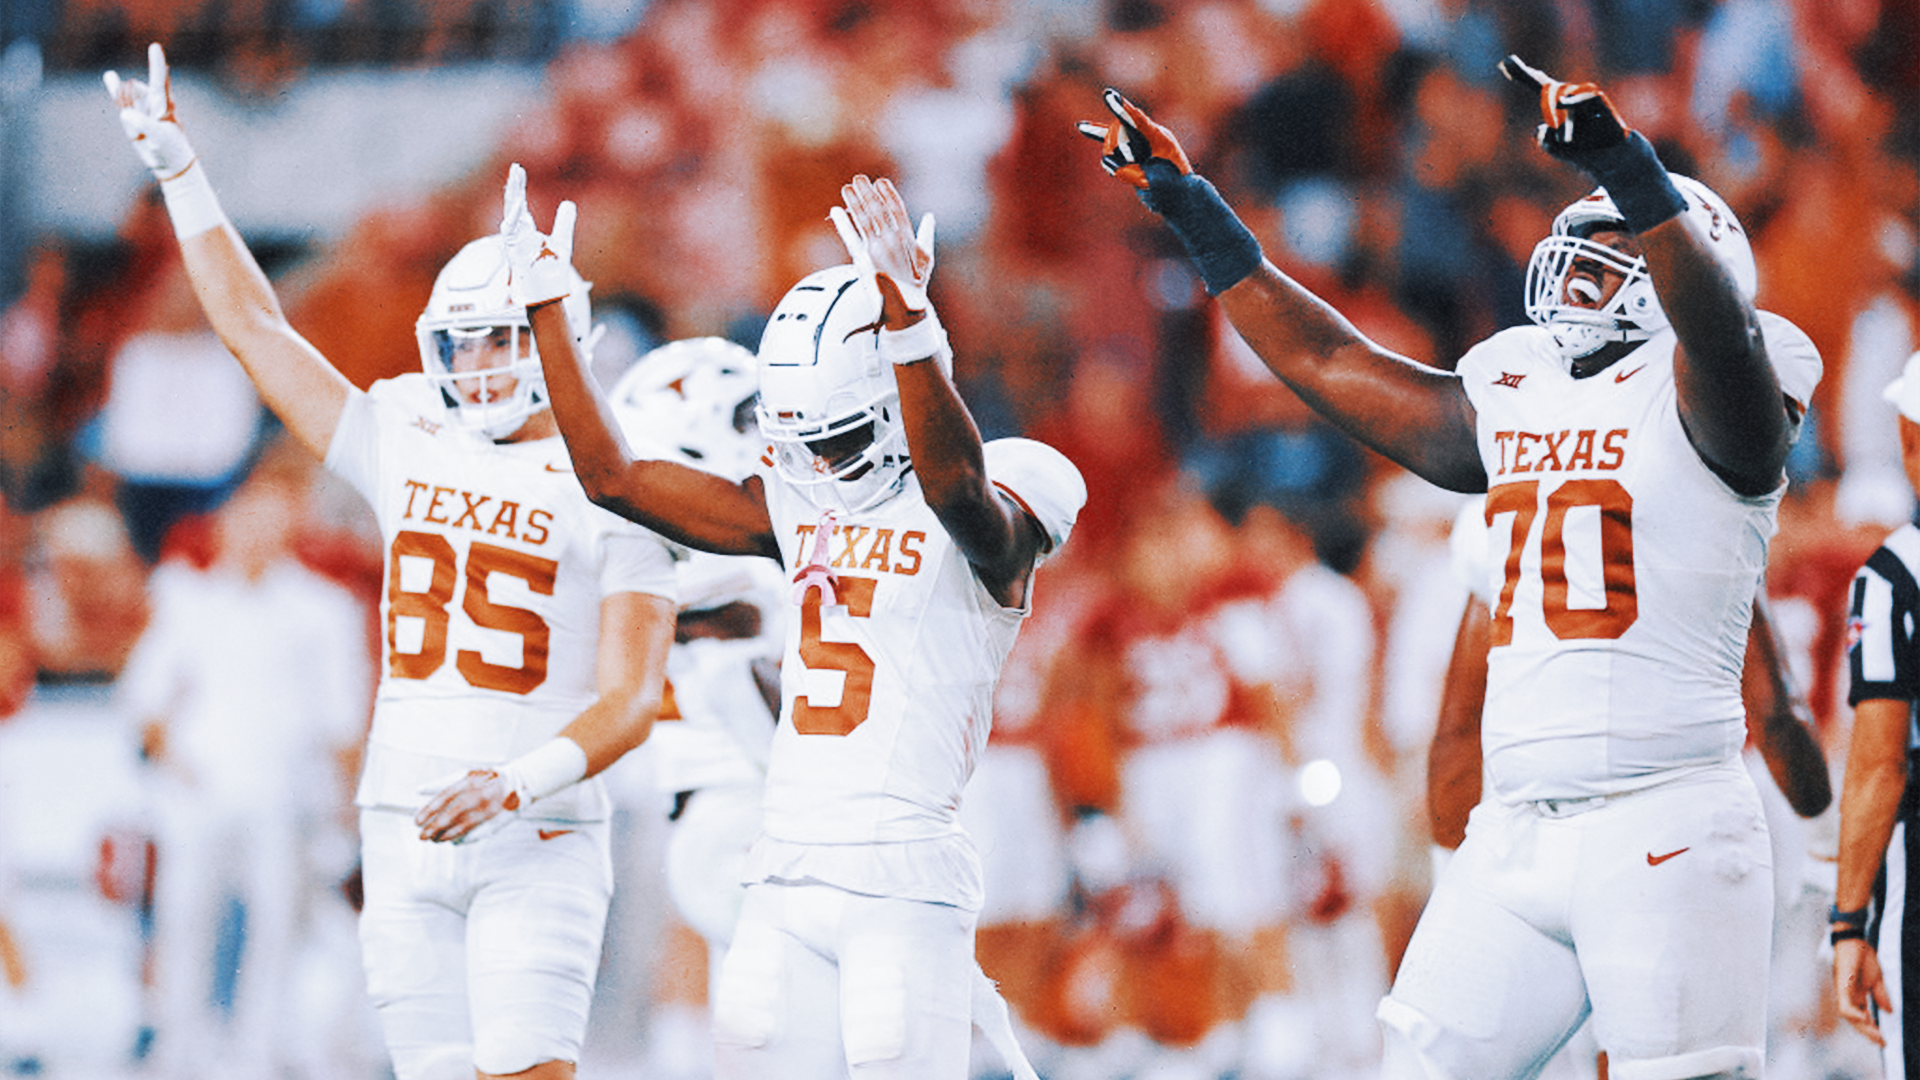 Texas jumps to No. 4 in latest AP Poll; Pac-12 with 8 ranked teams